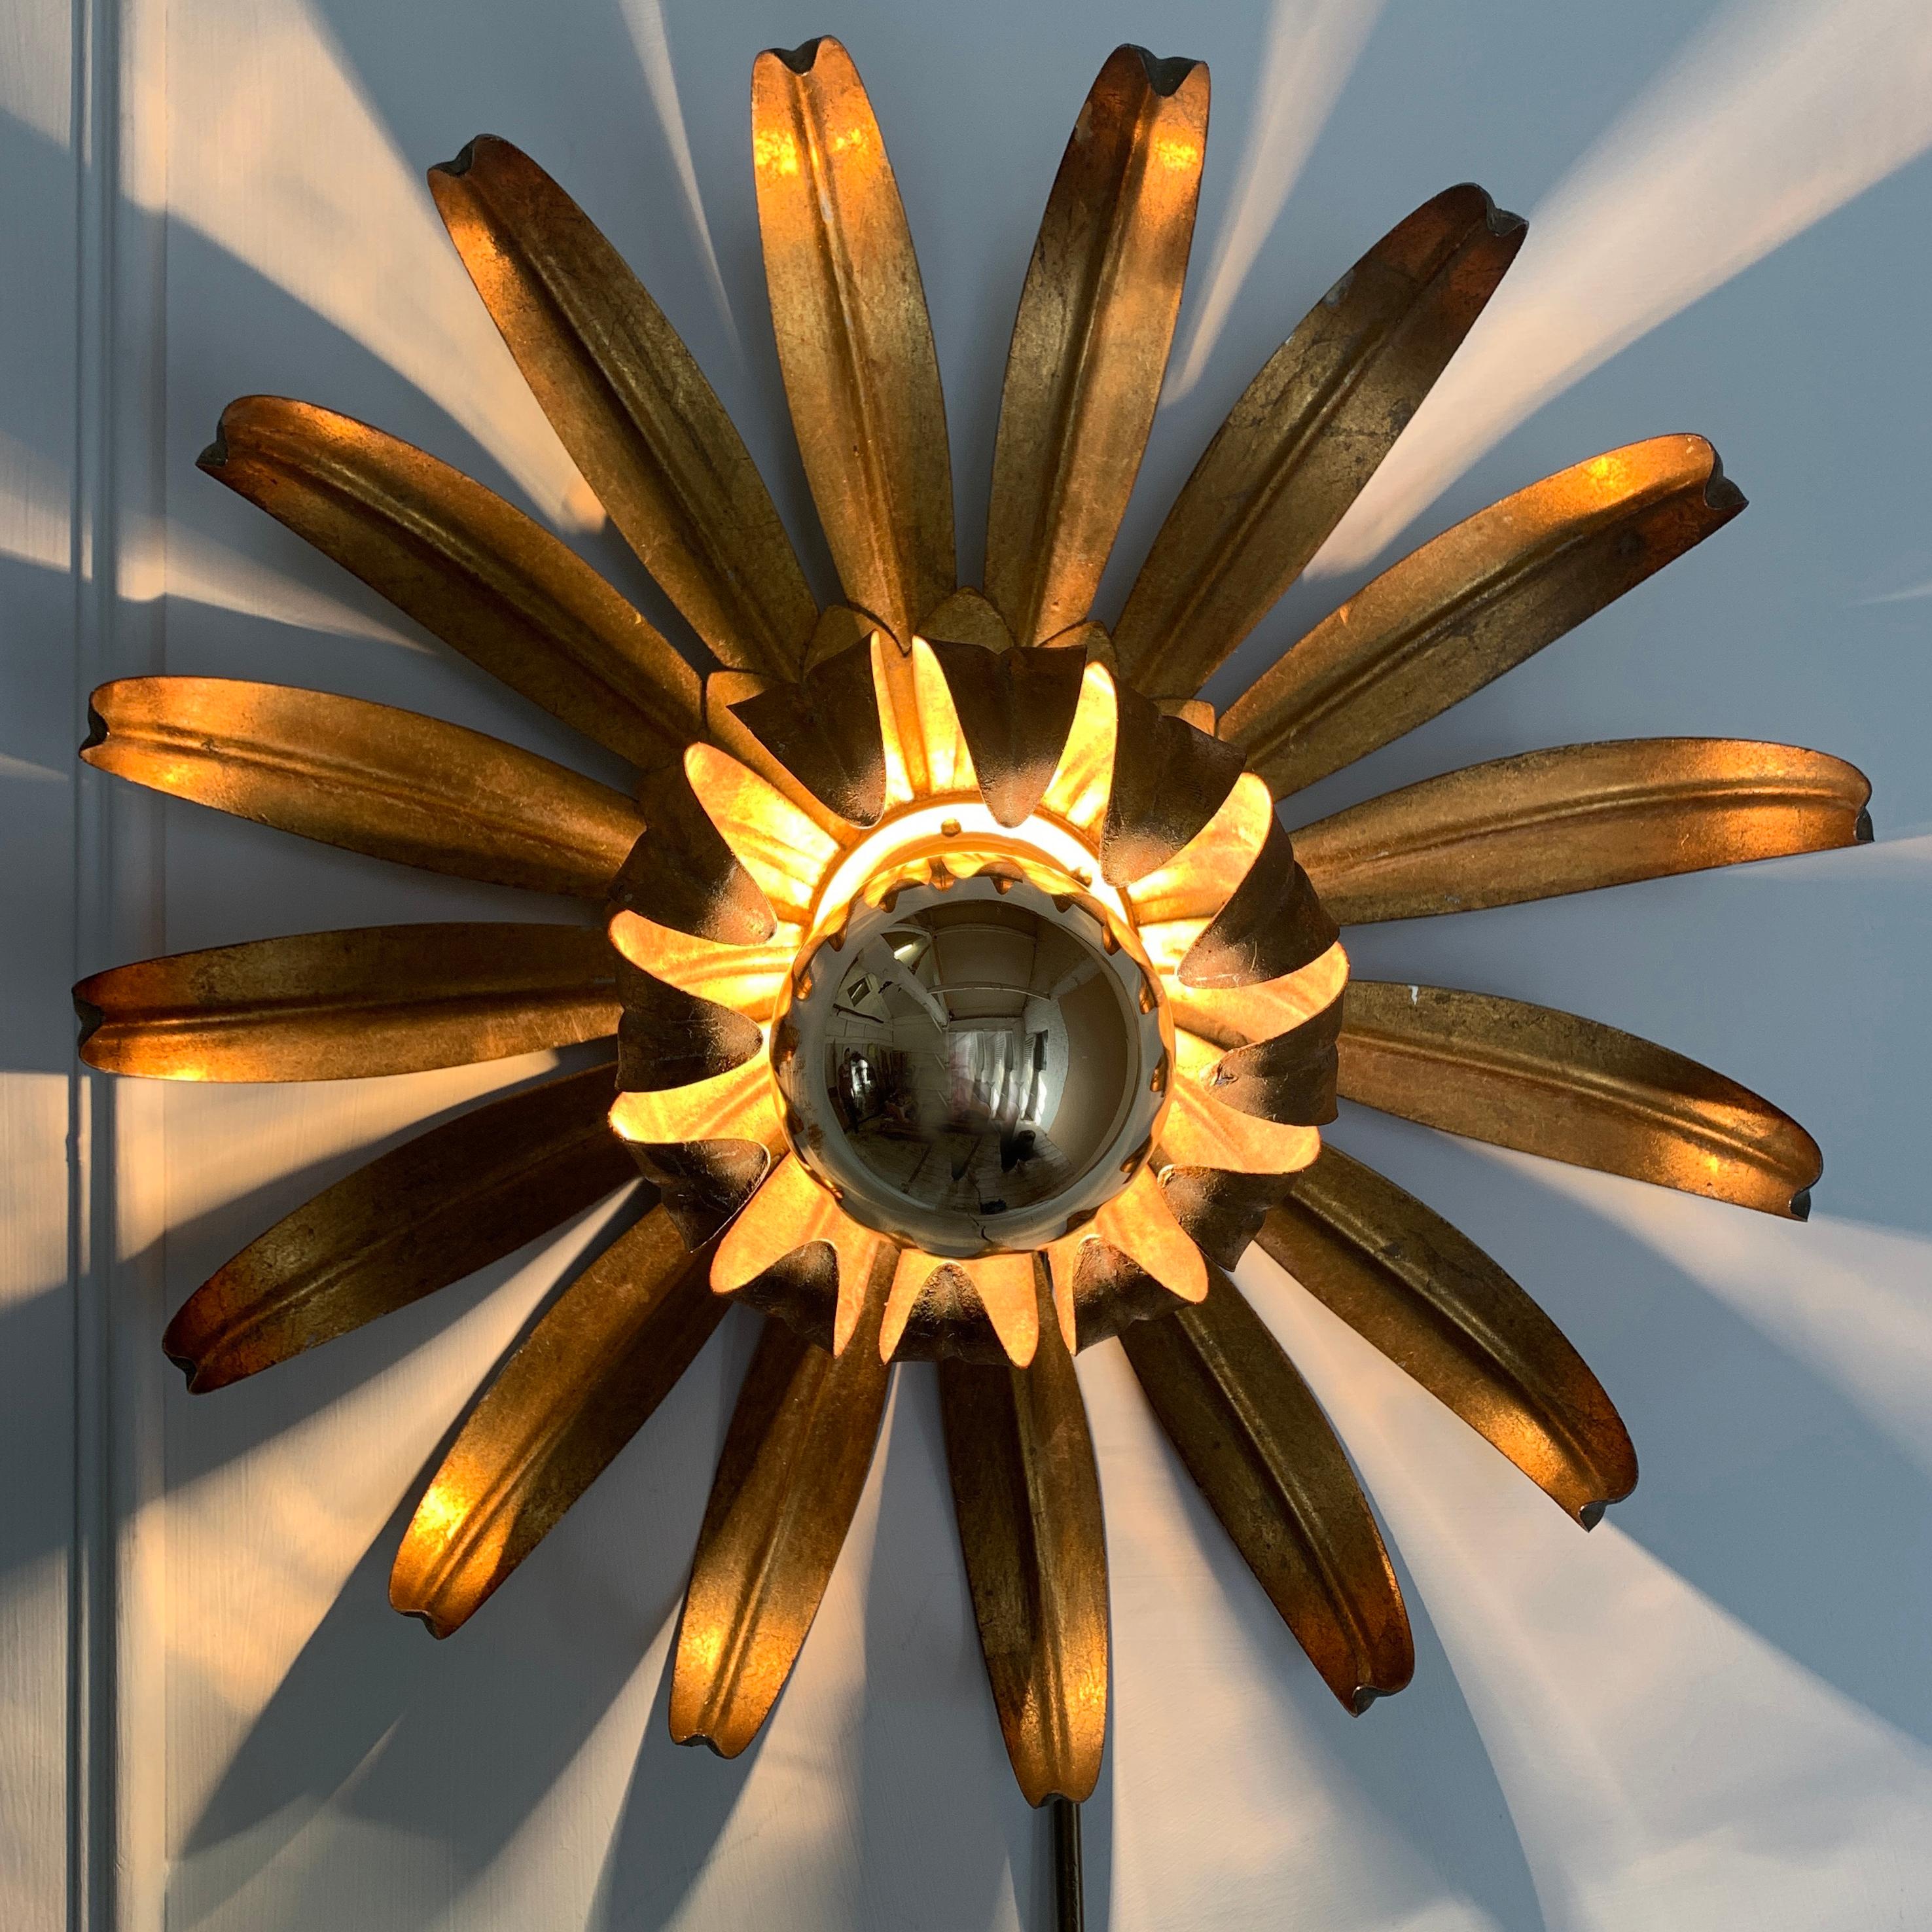 Gilt metal flower shaped ceiling light
Flower flush light attributed to Maison Jansen,
circa 1970s
The light has a hook on the back to attach to the ceiling
The light is 34cm width, 12cm depth
We have 2 of these available, priced individually